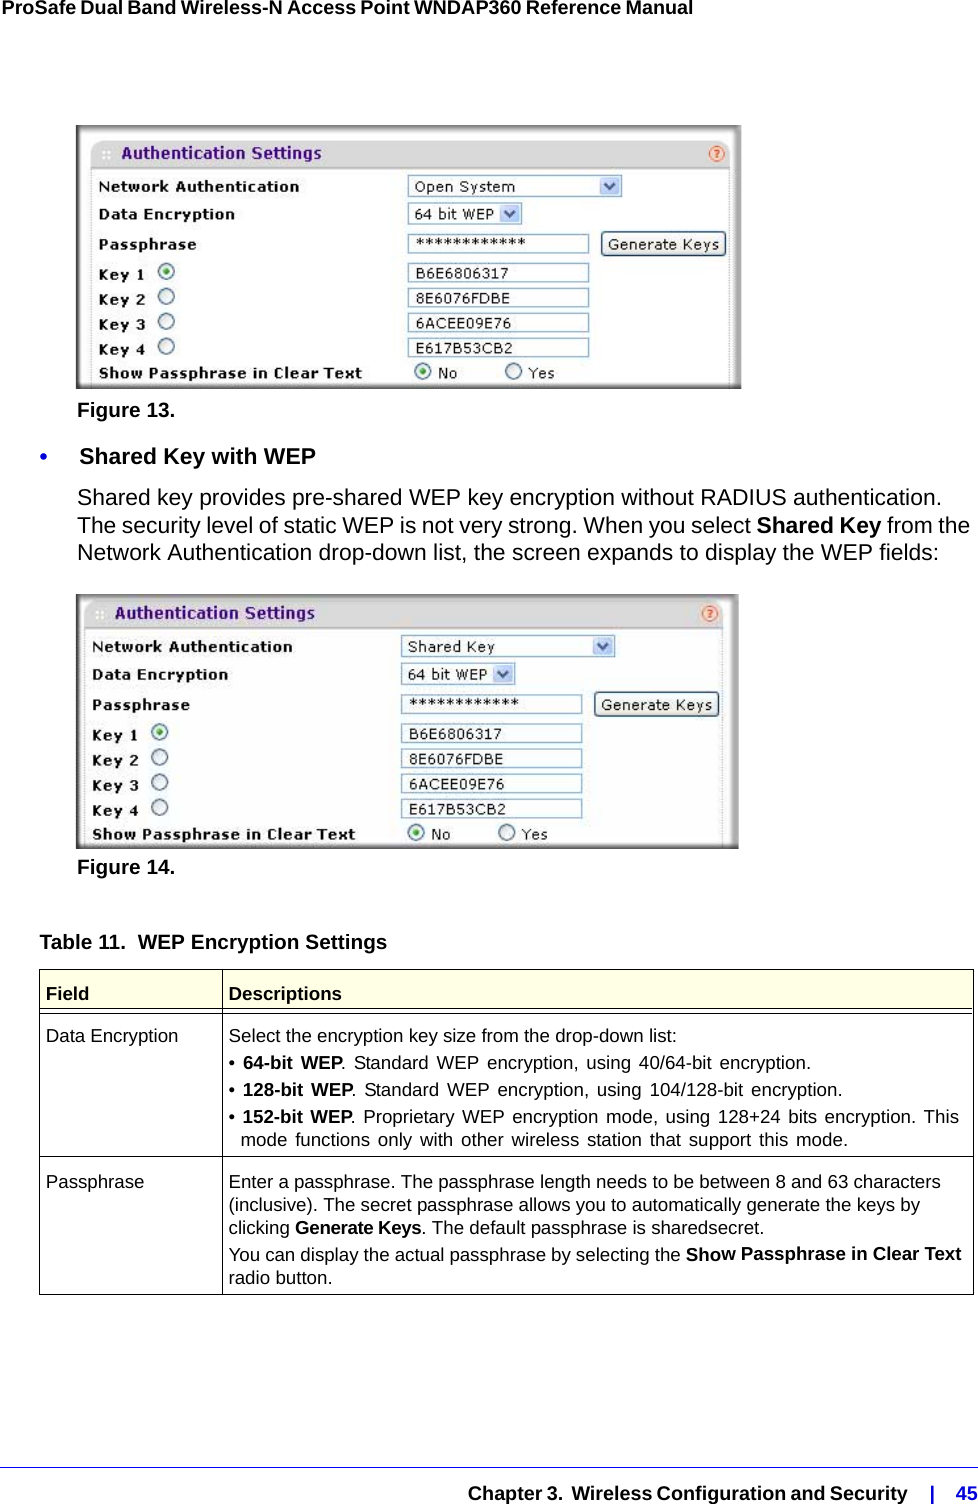   Chapter 3.  Wireless Configuration and Security    |    45ProSafe Dual Band Wireless-N Access Point WNDAP360 Reference Manual Figure 13.  •     Shared Key with WEPShared key provides pre-shared WEP key encryption without RADIUS authentication. The security level of static WEP is not very strong. When you select Shared Key from the Network Authentication drop-down list, the screen expands to display the WEP fields:Figure 14.  Table 11.  WEP Encryption Settings Field DescriptionsData Encryption Select the encryption key size from the drop-down list:• 64-bit WEP. Standard WEP encryption, using 40/64-bit encryption.• 128-bit WEP. Standard WEP encryption, using 104/128-bit encryption.• 152-bit WEP. Proprietary WEP encryption mode, using 128+24 bits encryption. This mode functions only with other wireless station that support this mode.Passphrase Enter a passphrase. The passphrase length needs to be between 8 and 63 characters (inclusive). The secret passphrase allows you to automatically generate the keys by clicking Generate Keys. The default passphrase is sharedsecret.You can display the actual passphrase by selecting the Show Passphrase in Clear Text radio button. 